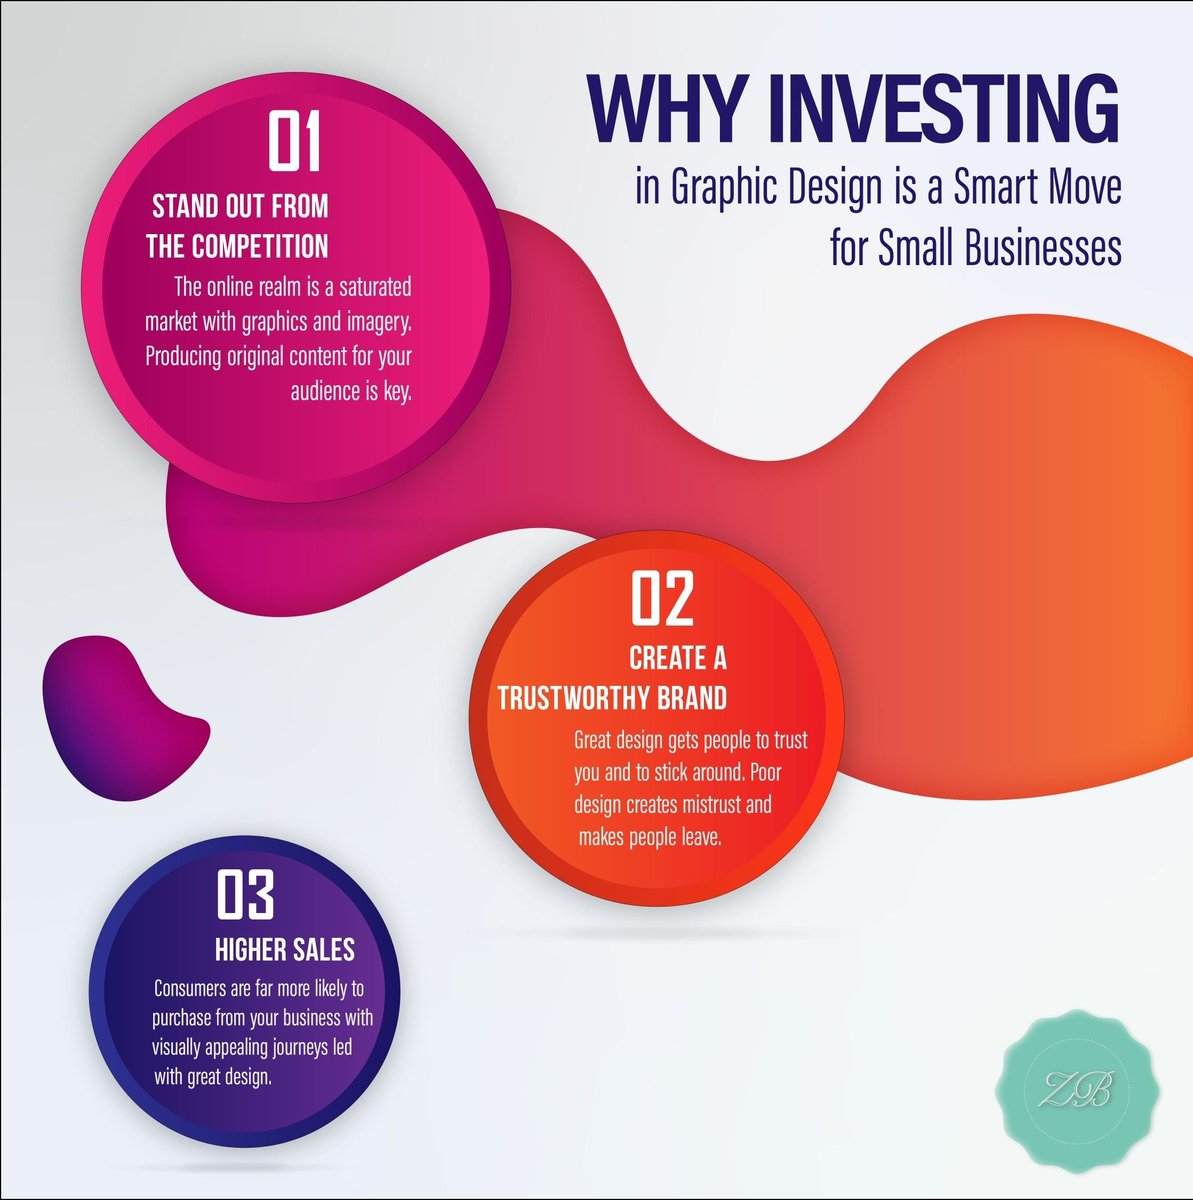 Why investing in graphic design is a smart move for small business 
Have a look at this 
#Infographic
#competition #trustworthybrand #highersales #branding #sales #business #SmallBusinesses #smallbusinessowner #GraphicDesign #Website #WebsiteDesign #standout #investment